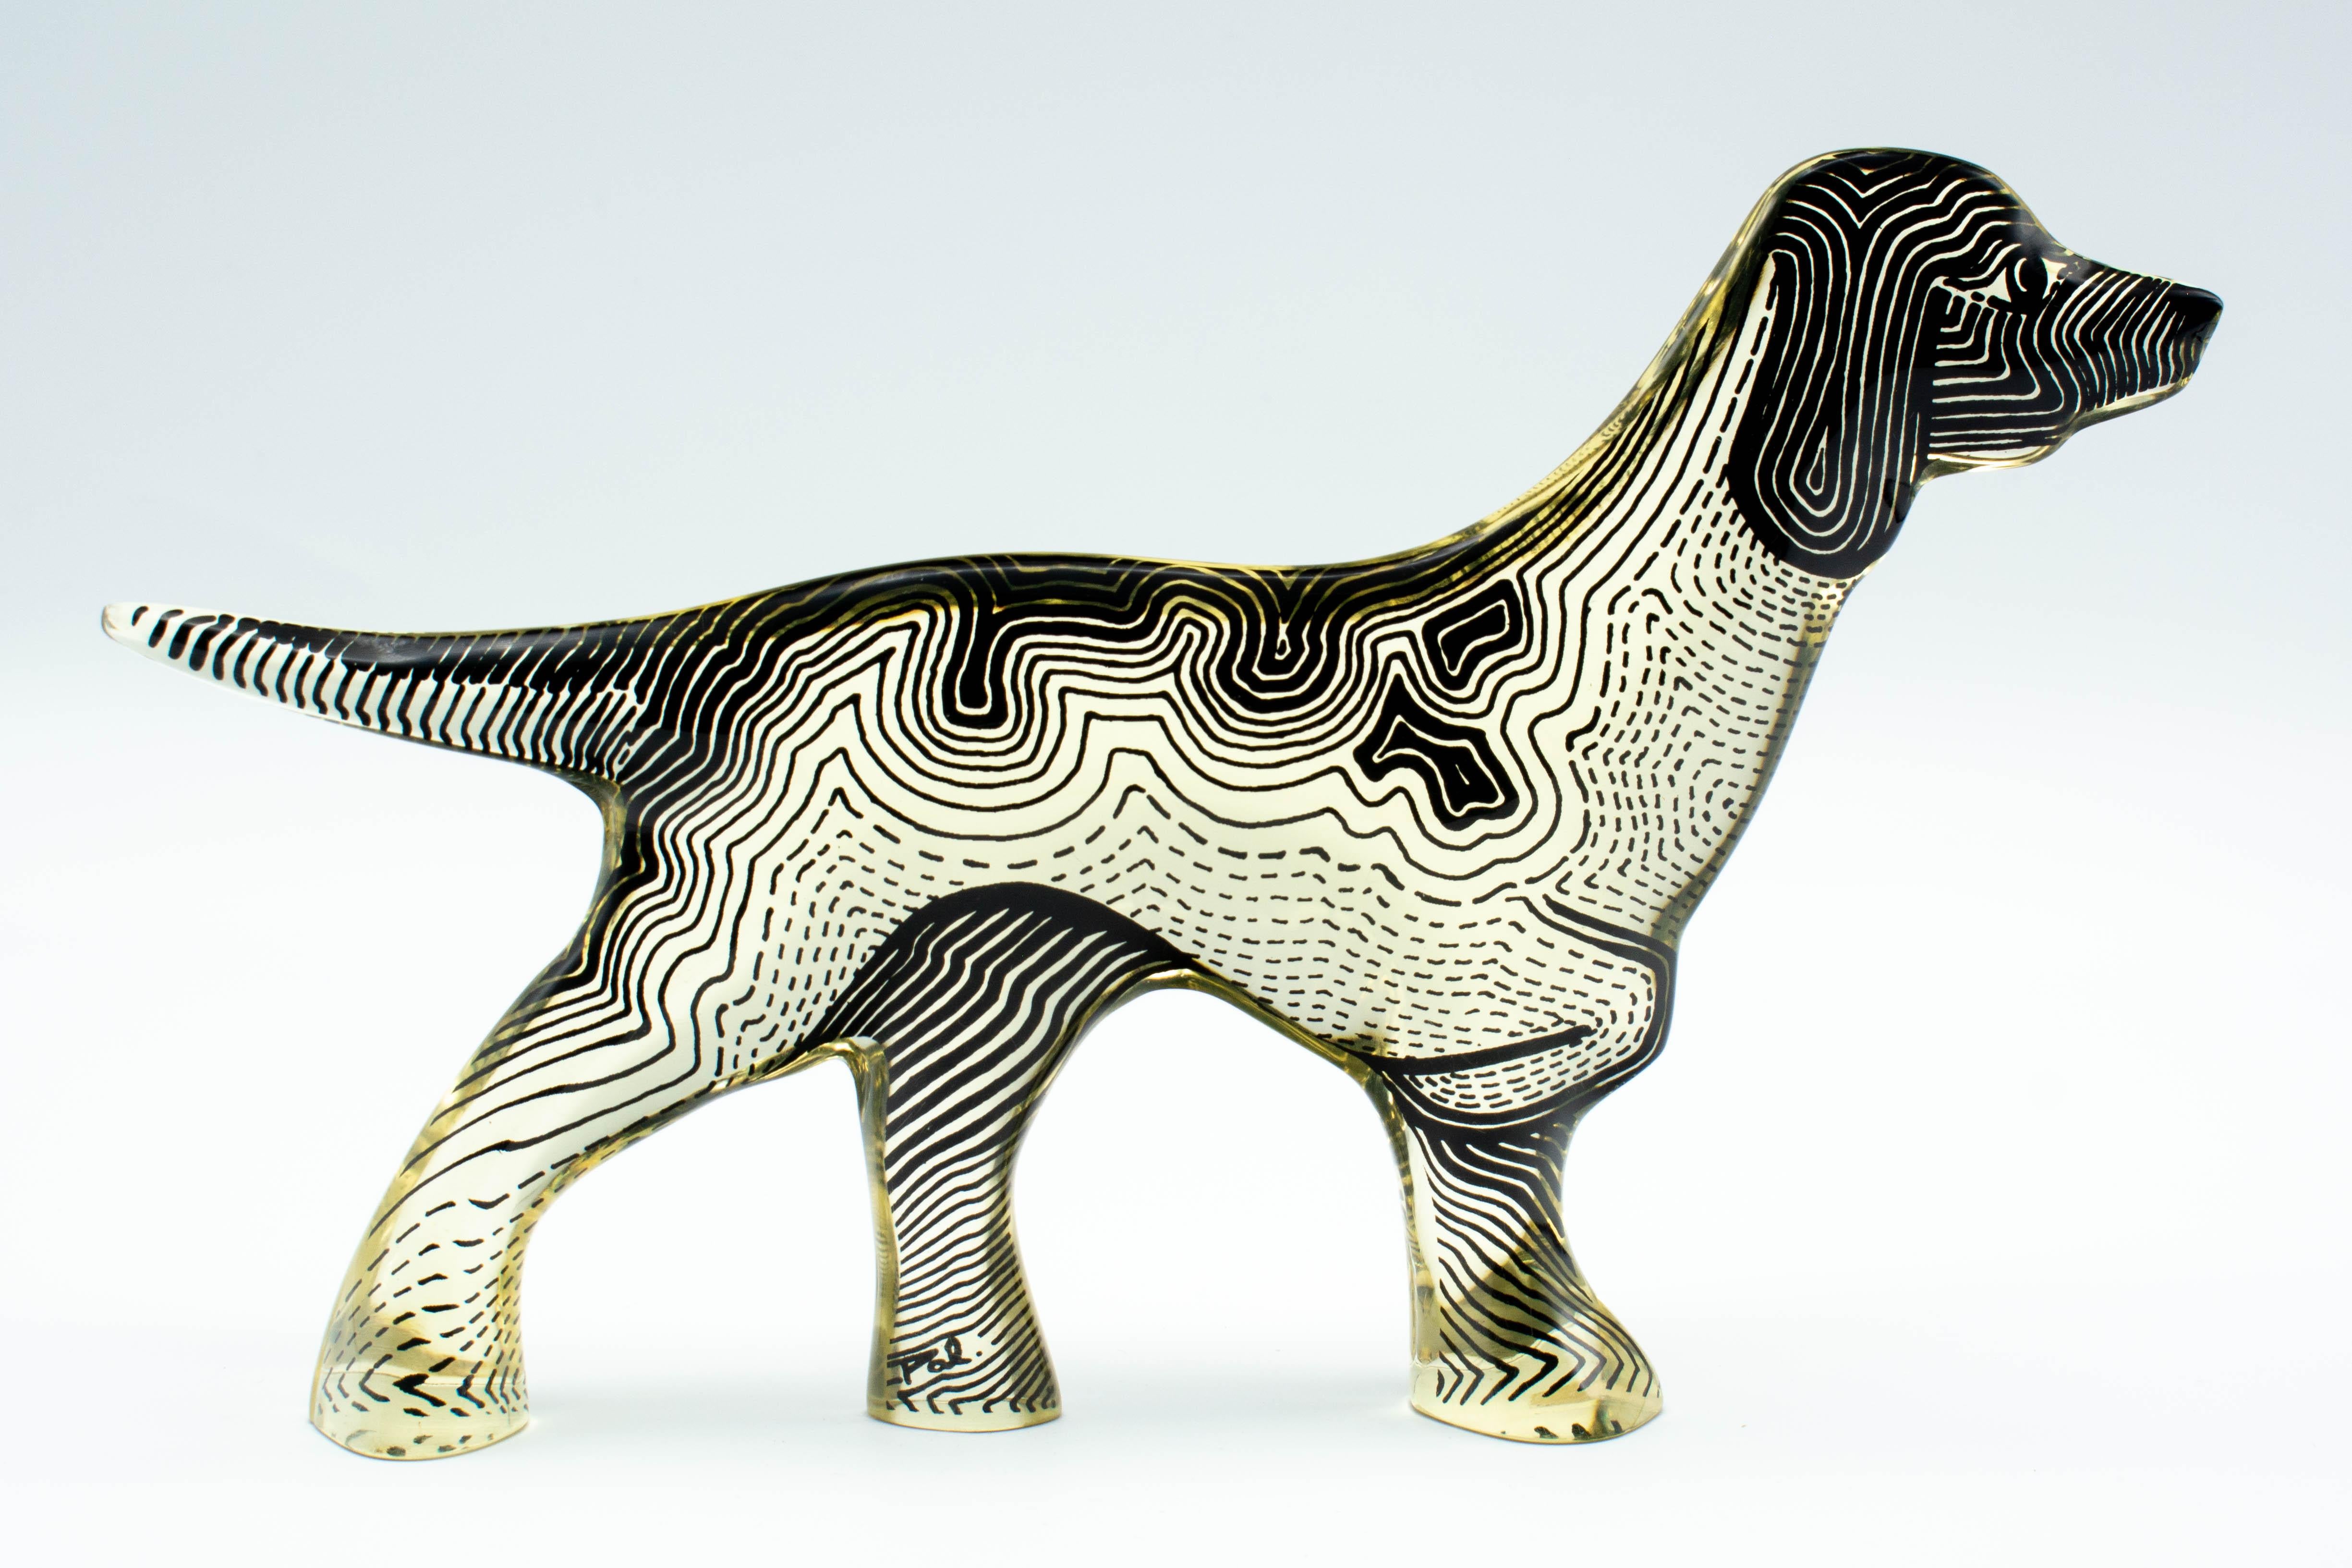 A pair of Mid-Century Modern Lucite Op Art dogs, a Pointer and a Scottie, designed by Abraham Palatnik. Original labels on bottom: Made in Brasil. Signature on leg of Pointer: Pal. 
Abraham Palatnik (born in 1928) is a Brazilian artist and inventor